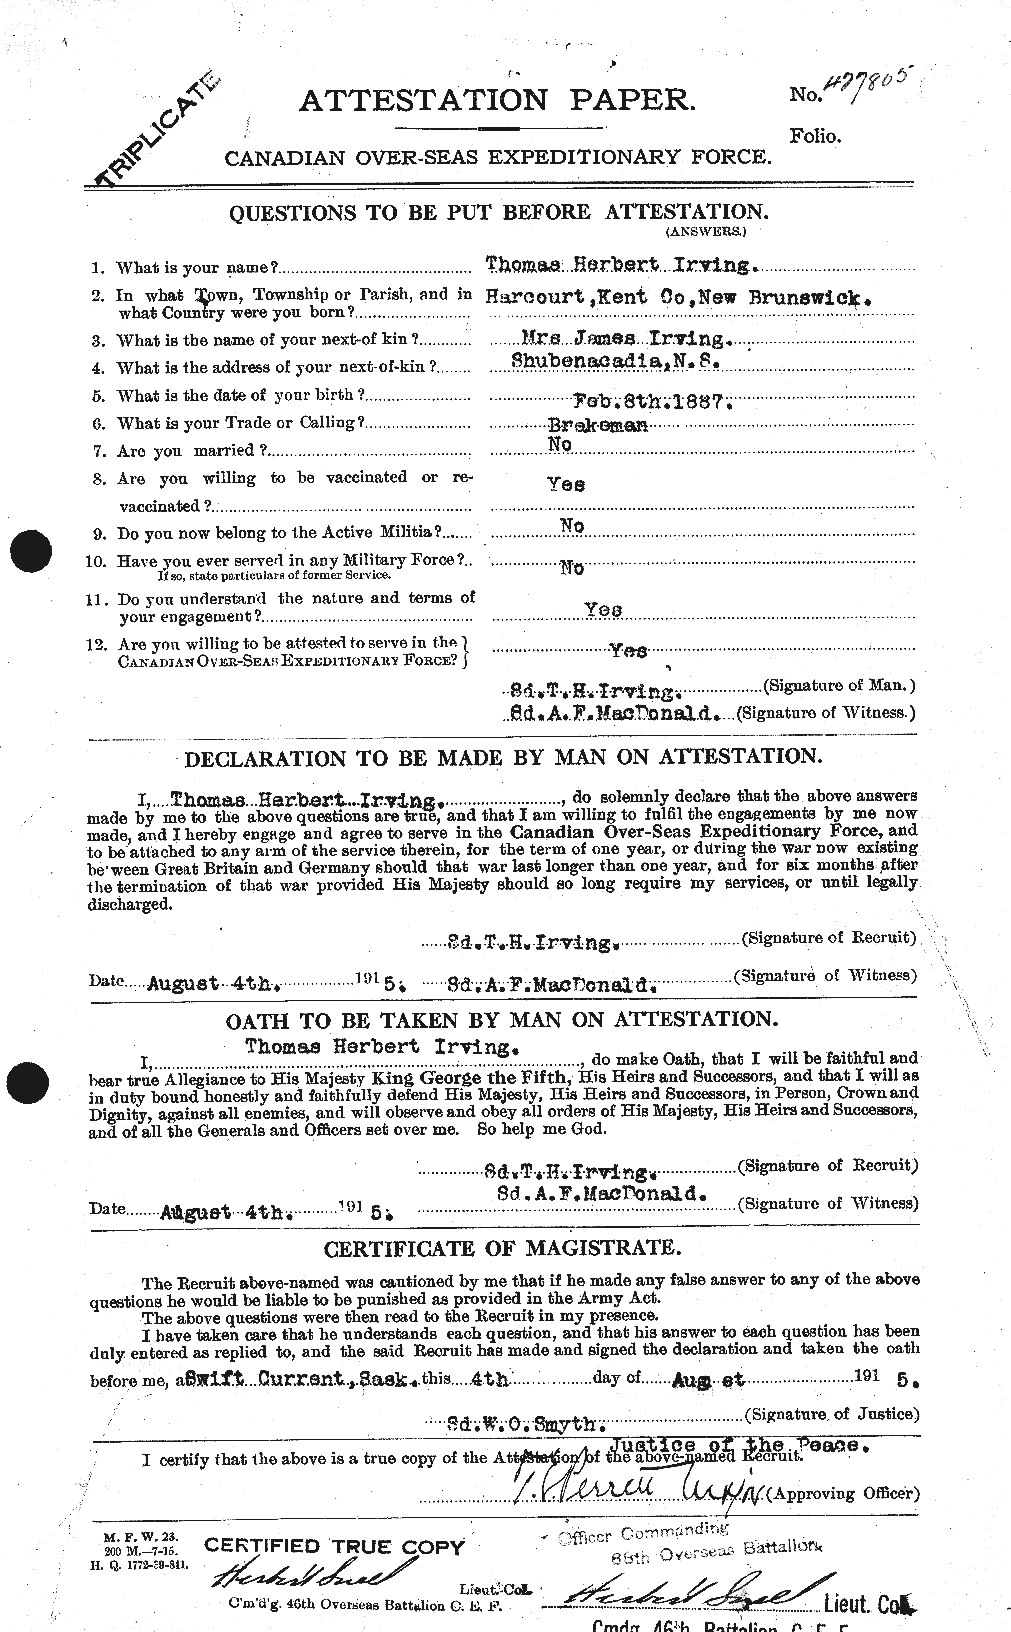 Personnel Records of the First World War - CEF 412730a